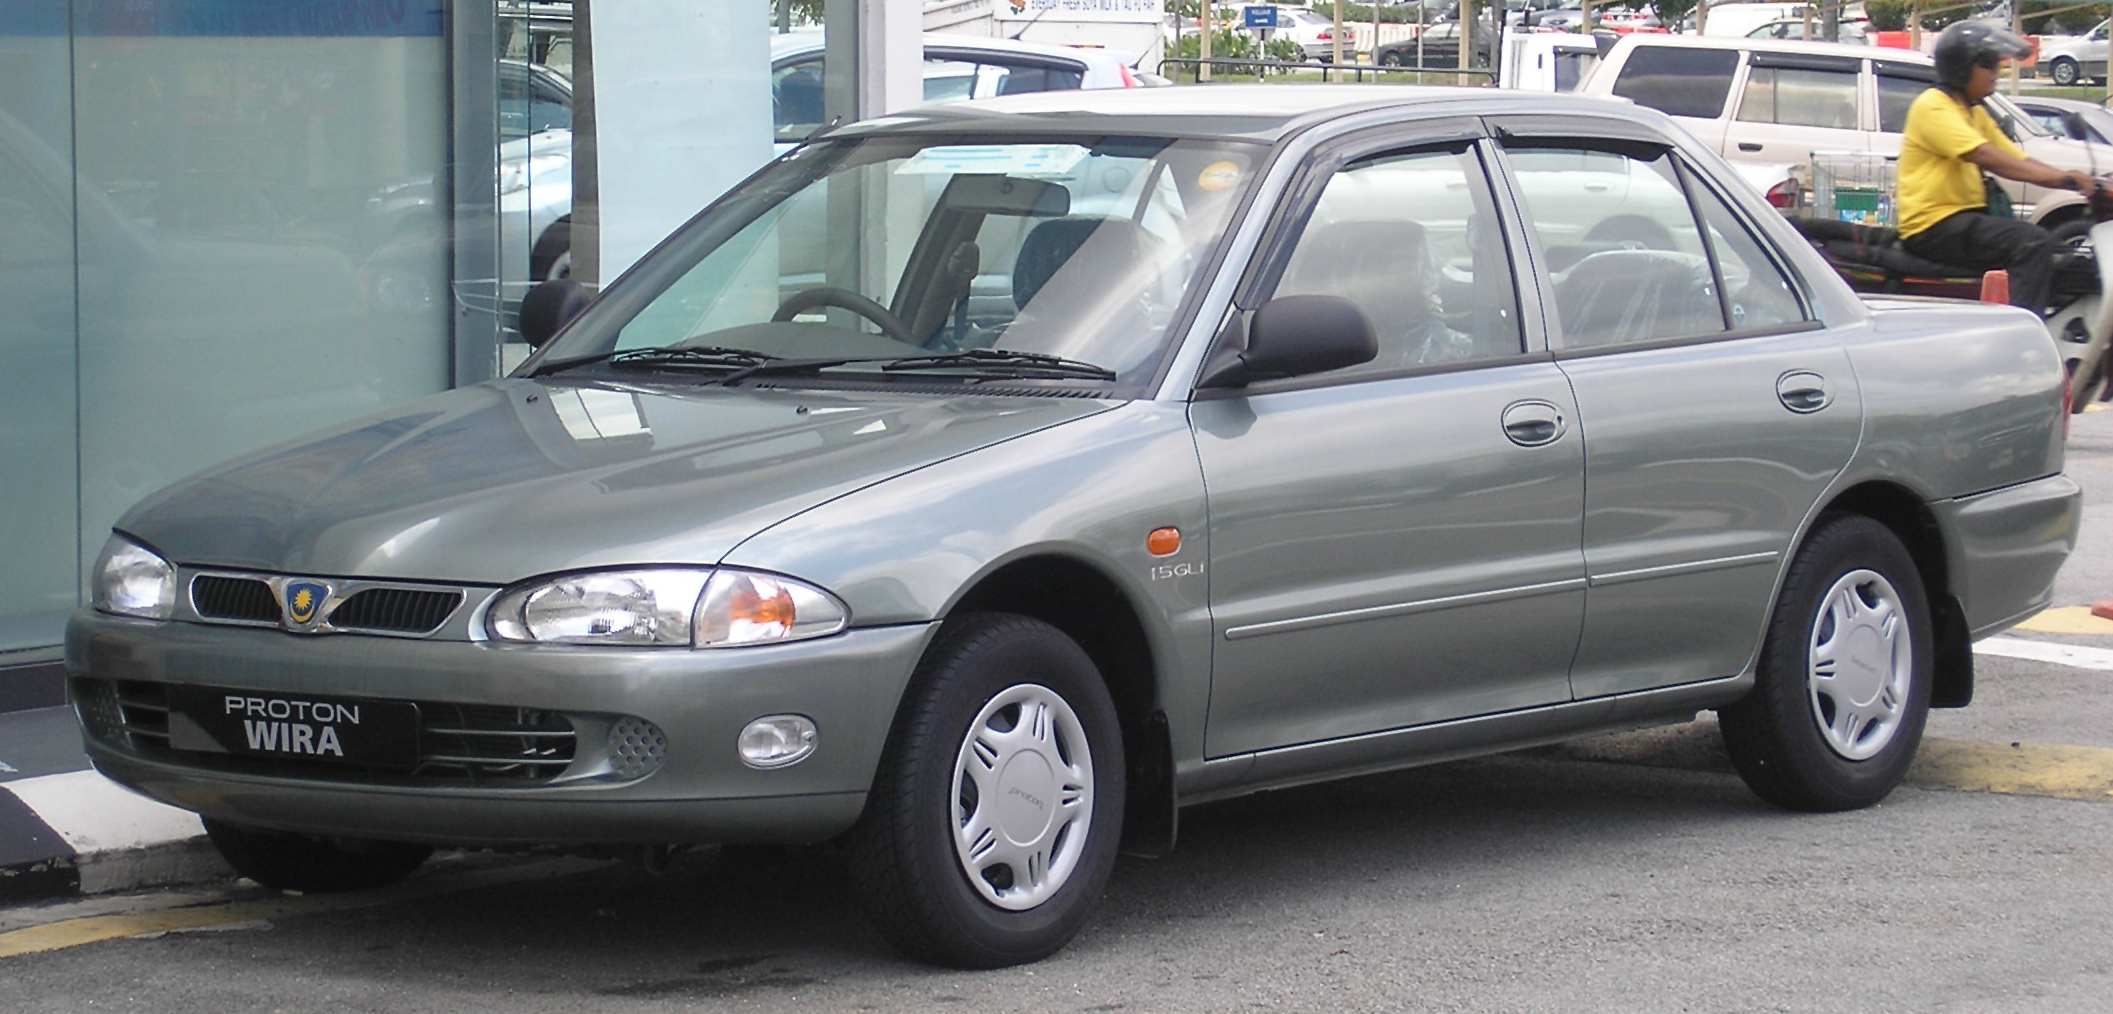 Thieves In Malaysia Love Stealing Proton Wira Cars The Most